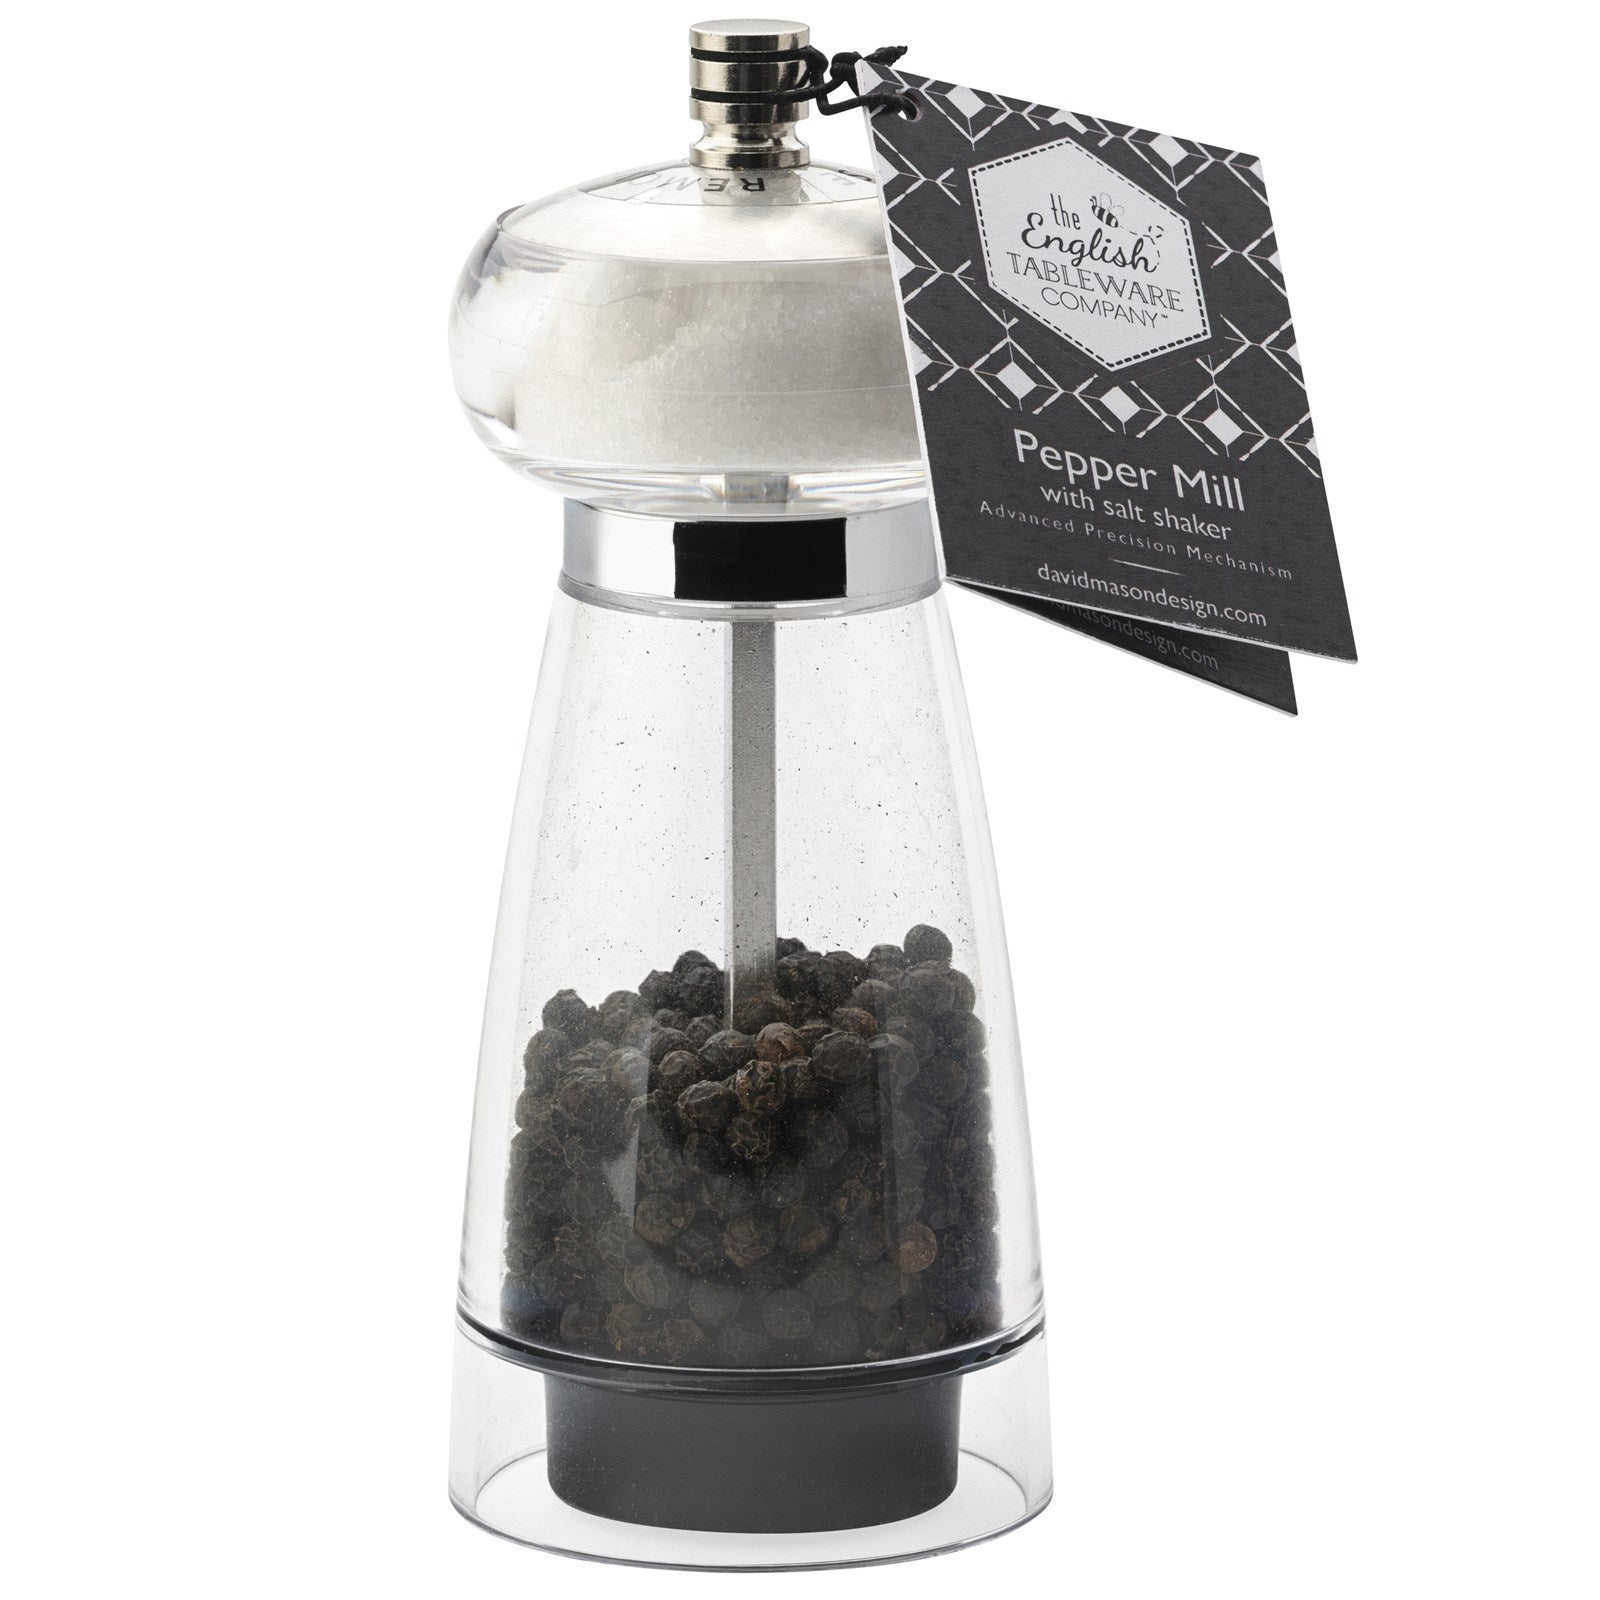 The English Tableware Company Comet Combi Pepper Mill and Salt Shaker